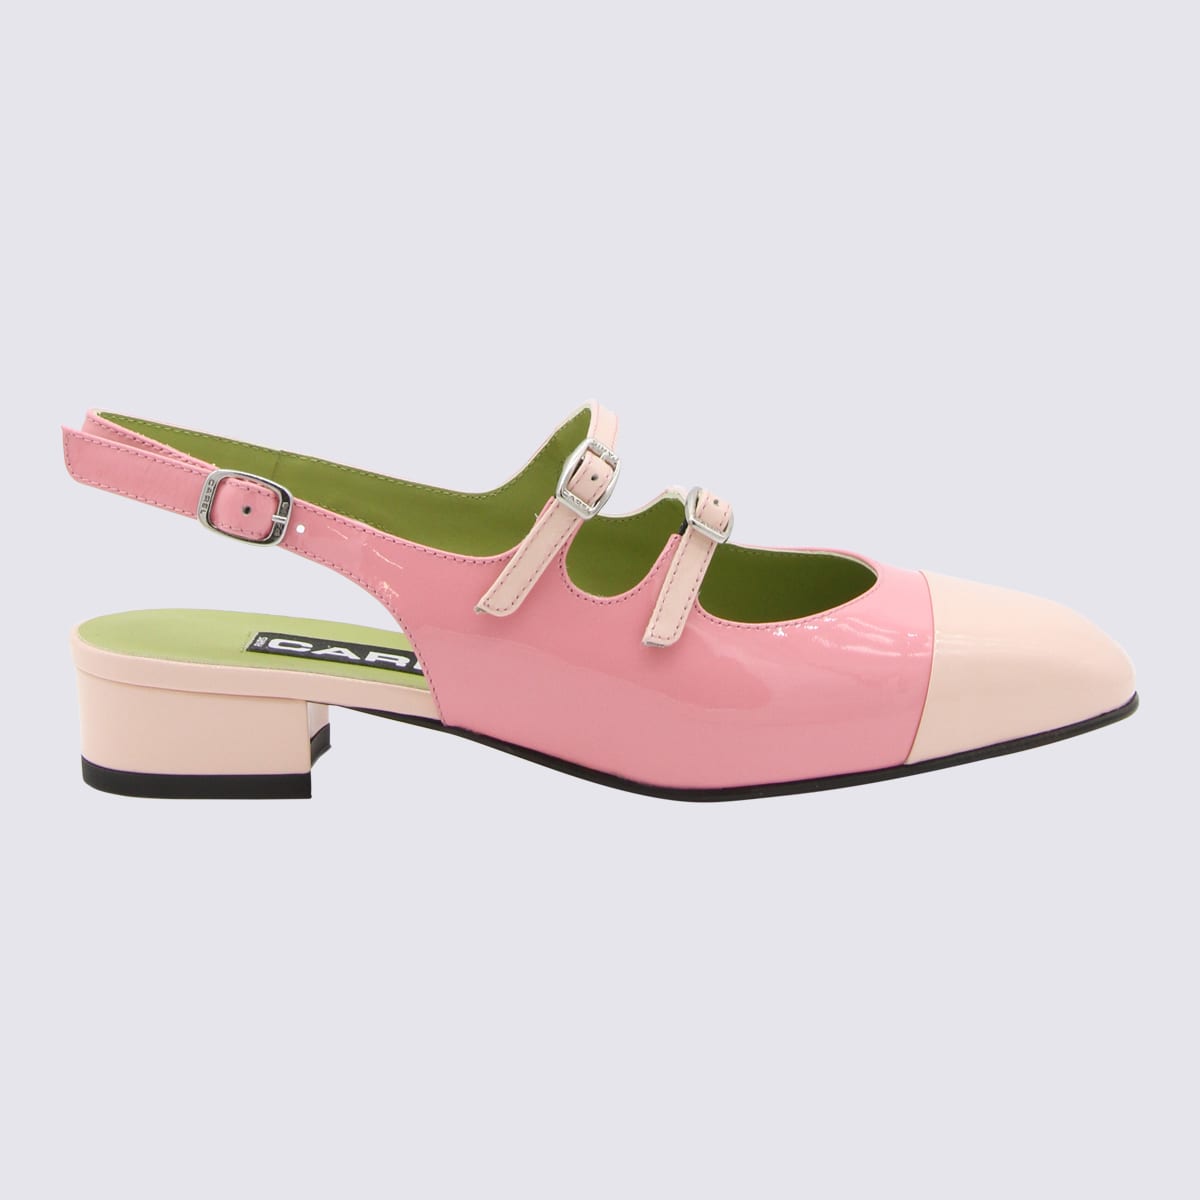 Carel Pink And Nude Leather Abricot Flats